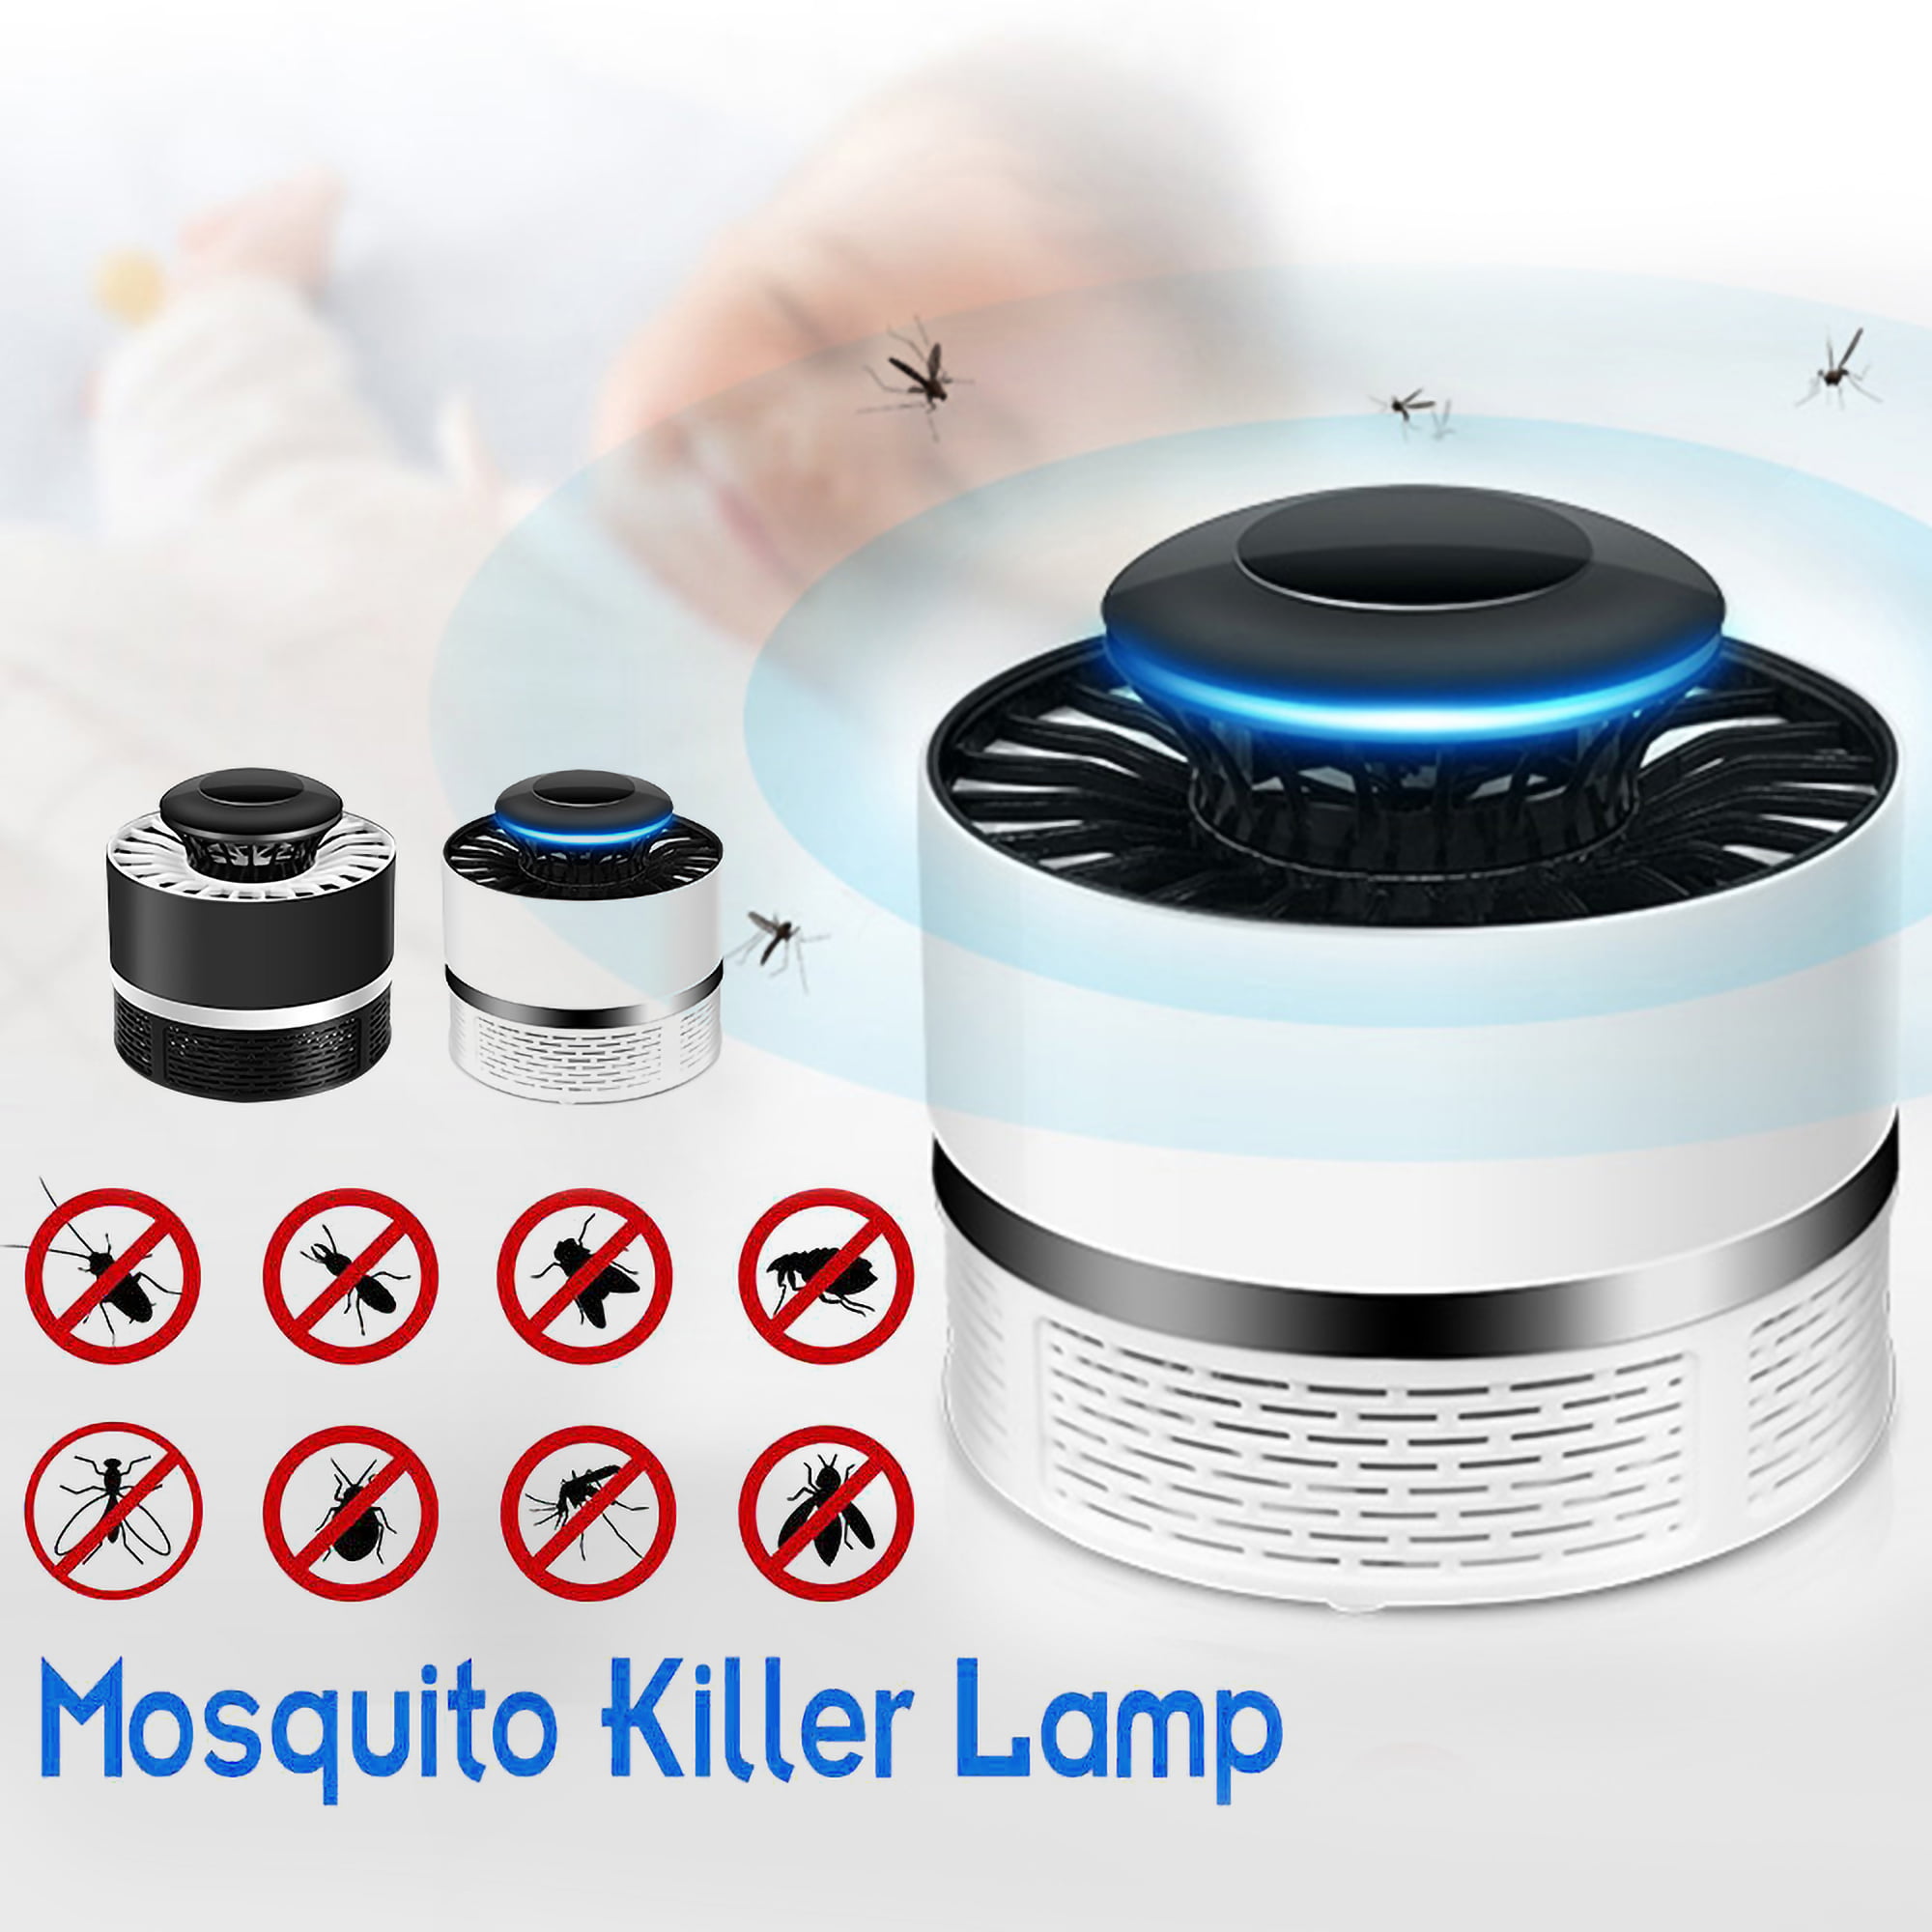 Details about   5W Safe Photocatalytic Mosquito Killer Lamp LED Light Insect Non-Toxic USB U8S4 